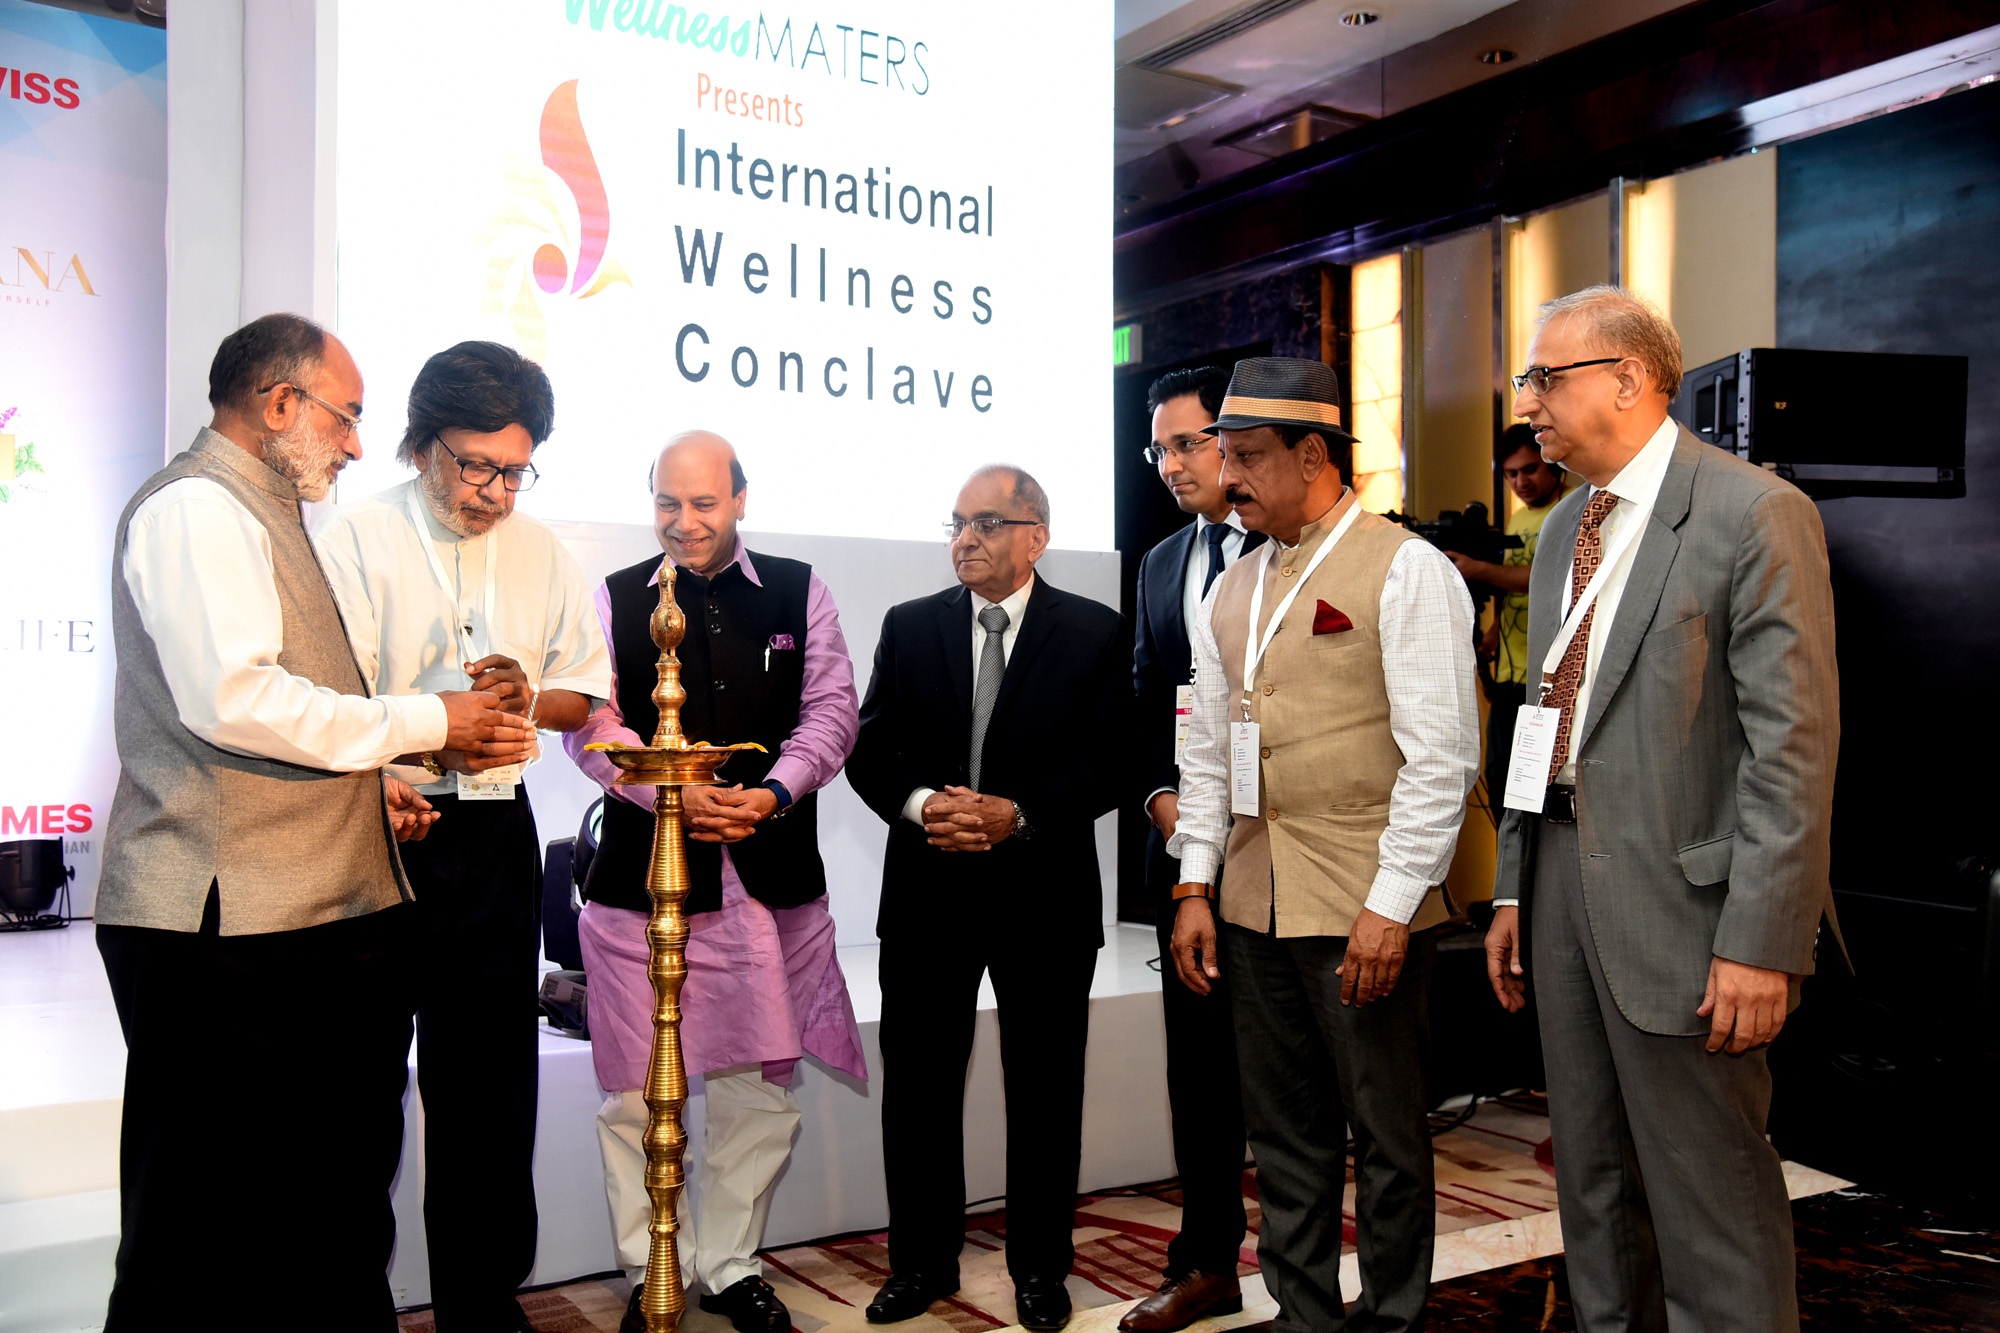 Sensational two-days at the International Wellness Conclave 2018